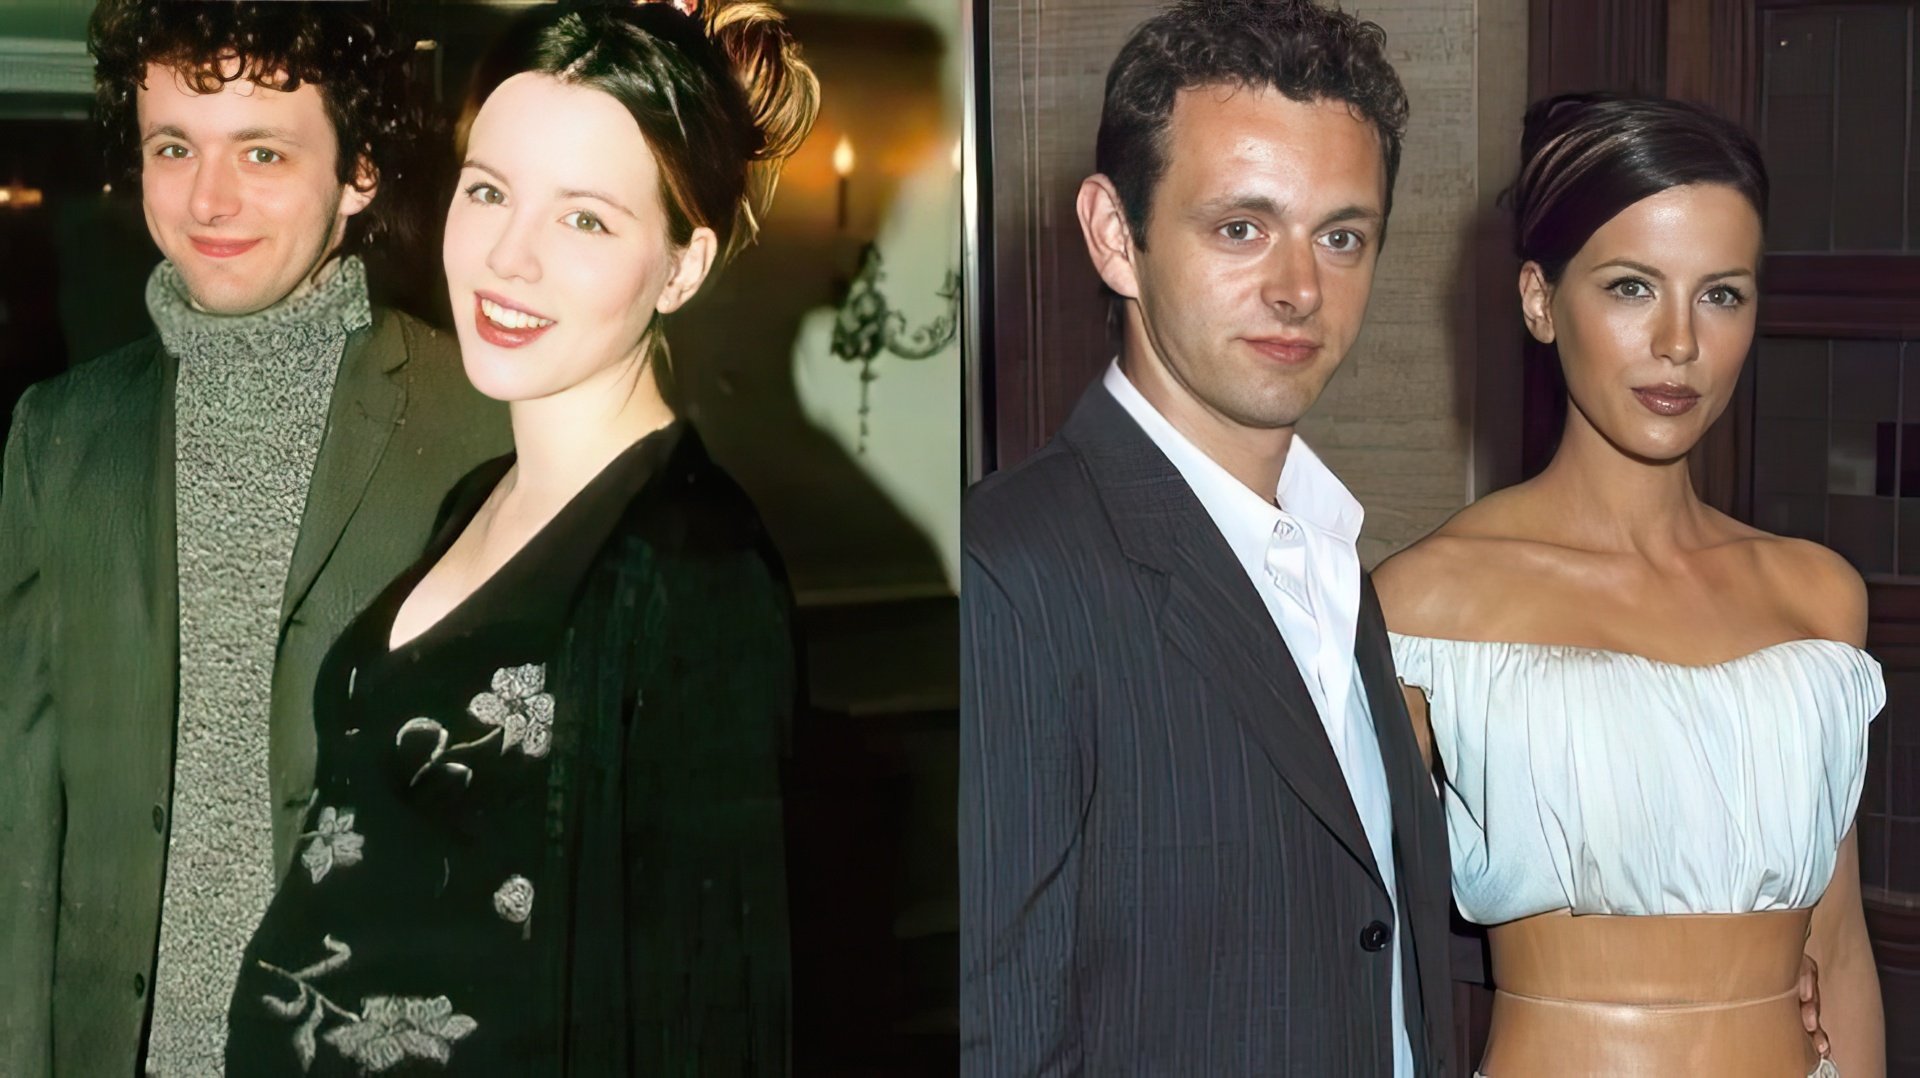 Michael Sheen and Kate Beckinsale were together for nine years